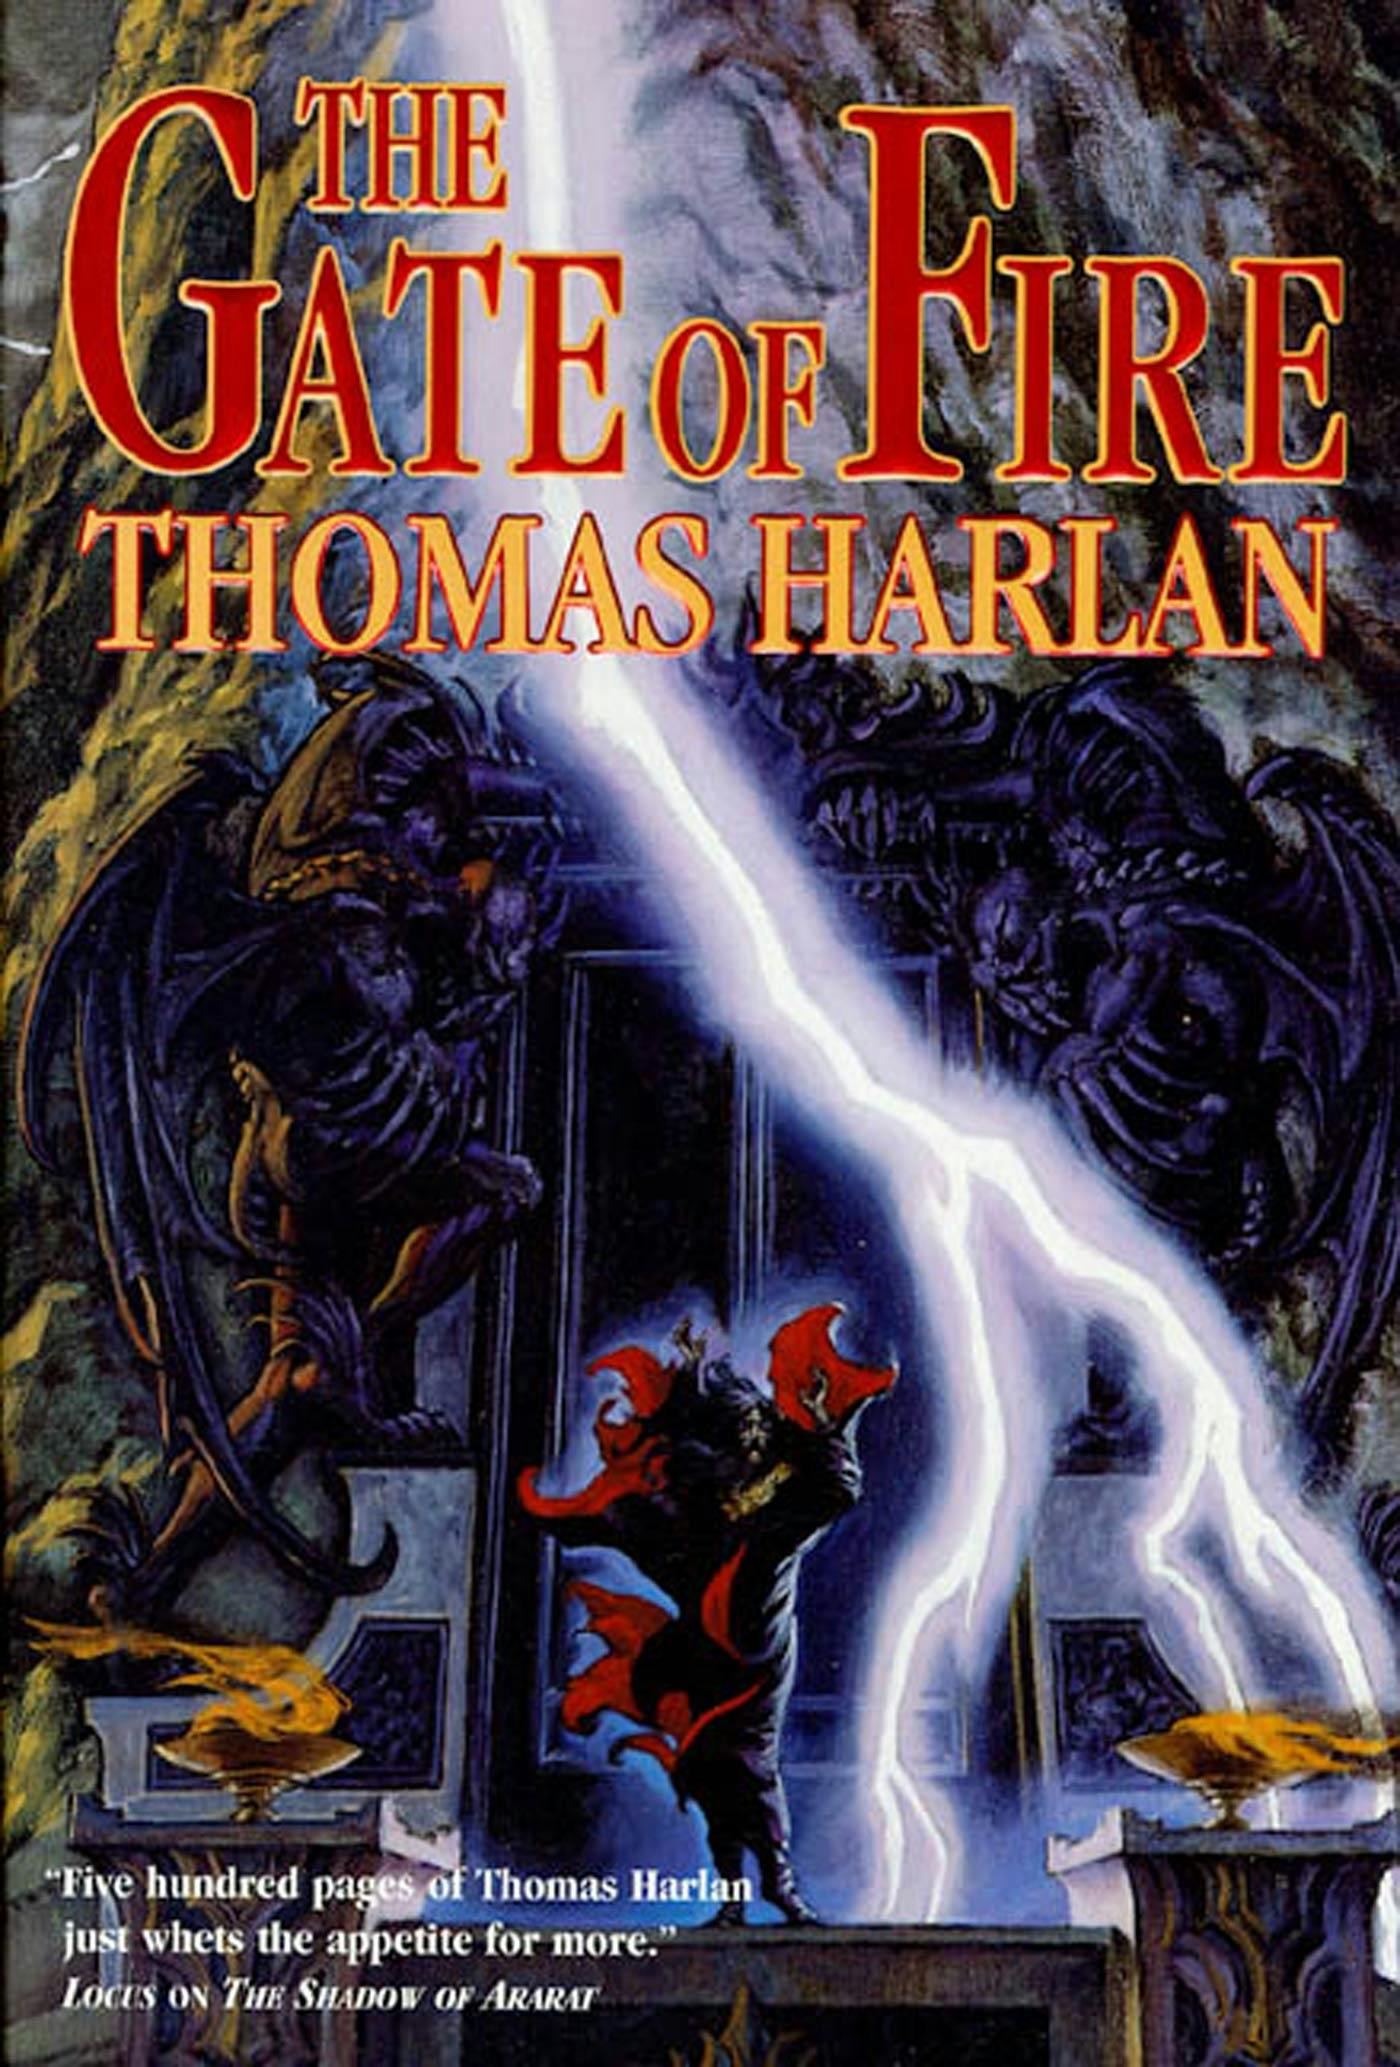 Cover for the book titled as: The Gate of Fire